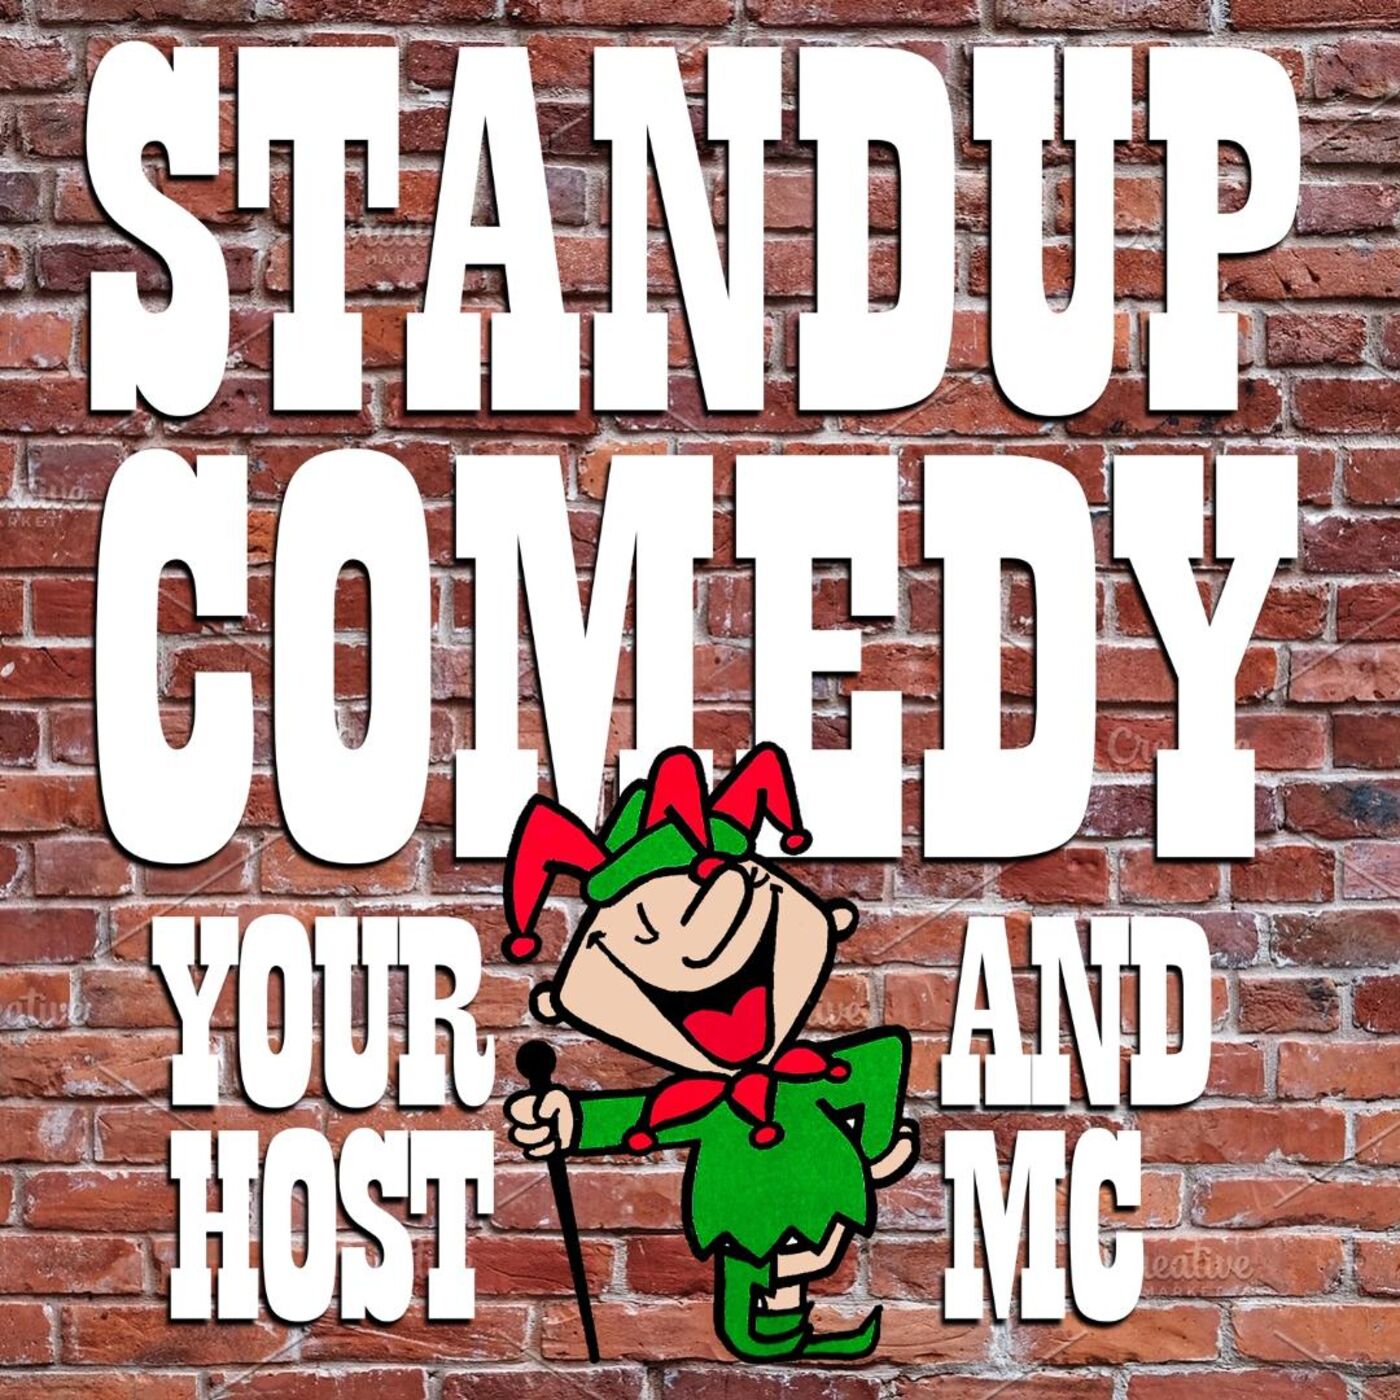 Standup Comedy   "Your Host and MC"